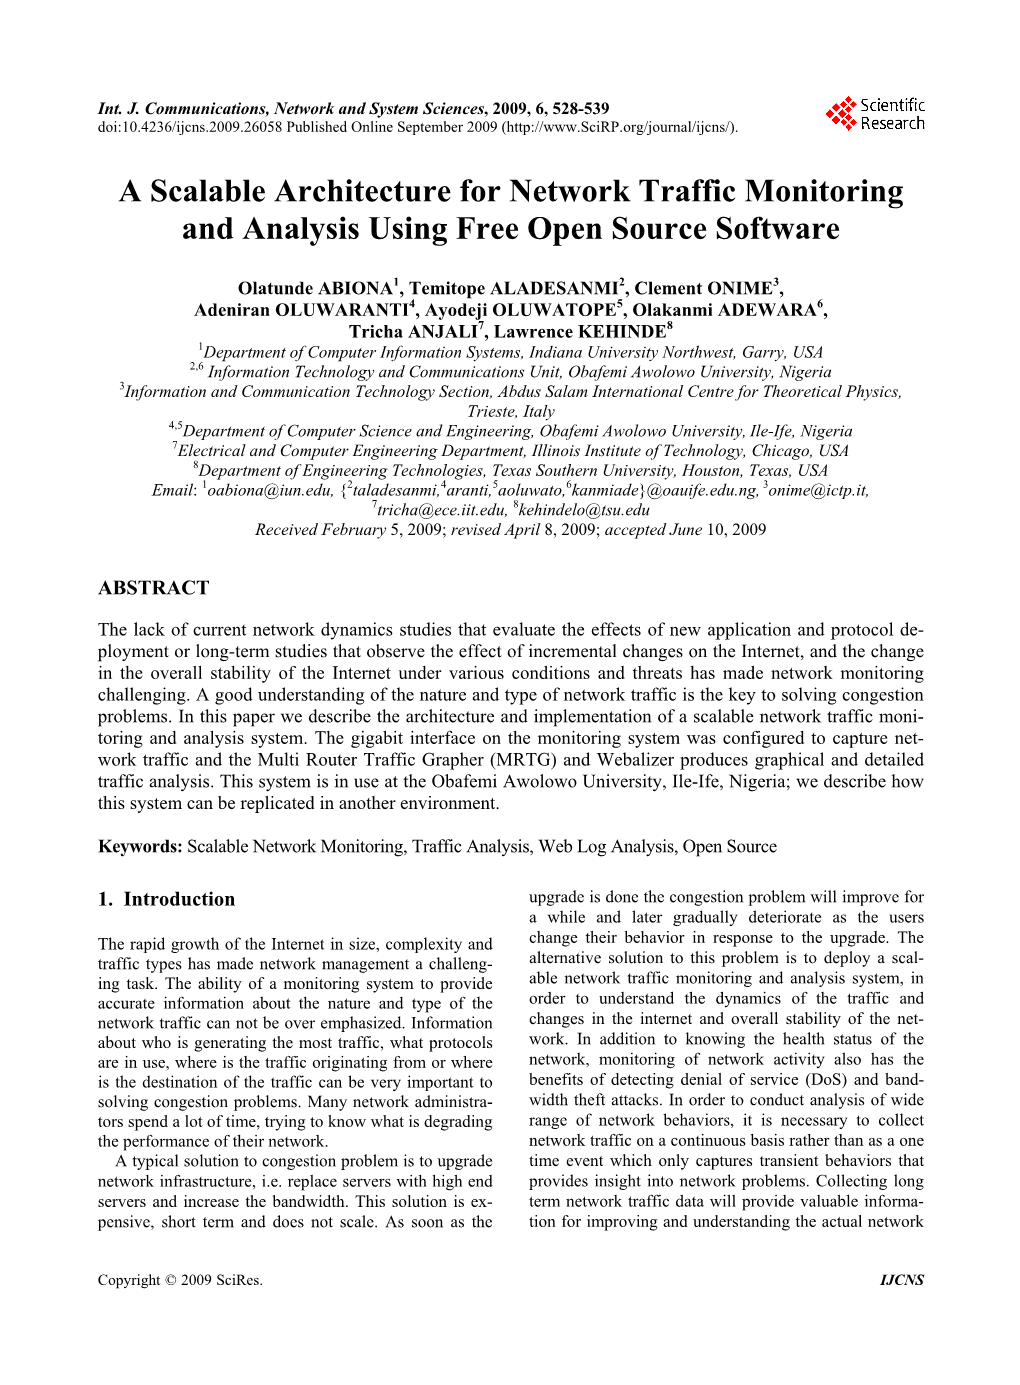 A Scalable Architecture for Network Traffic Monitoring and Analysis Using Free Open Source Software